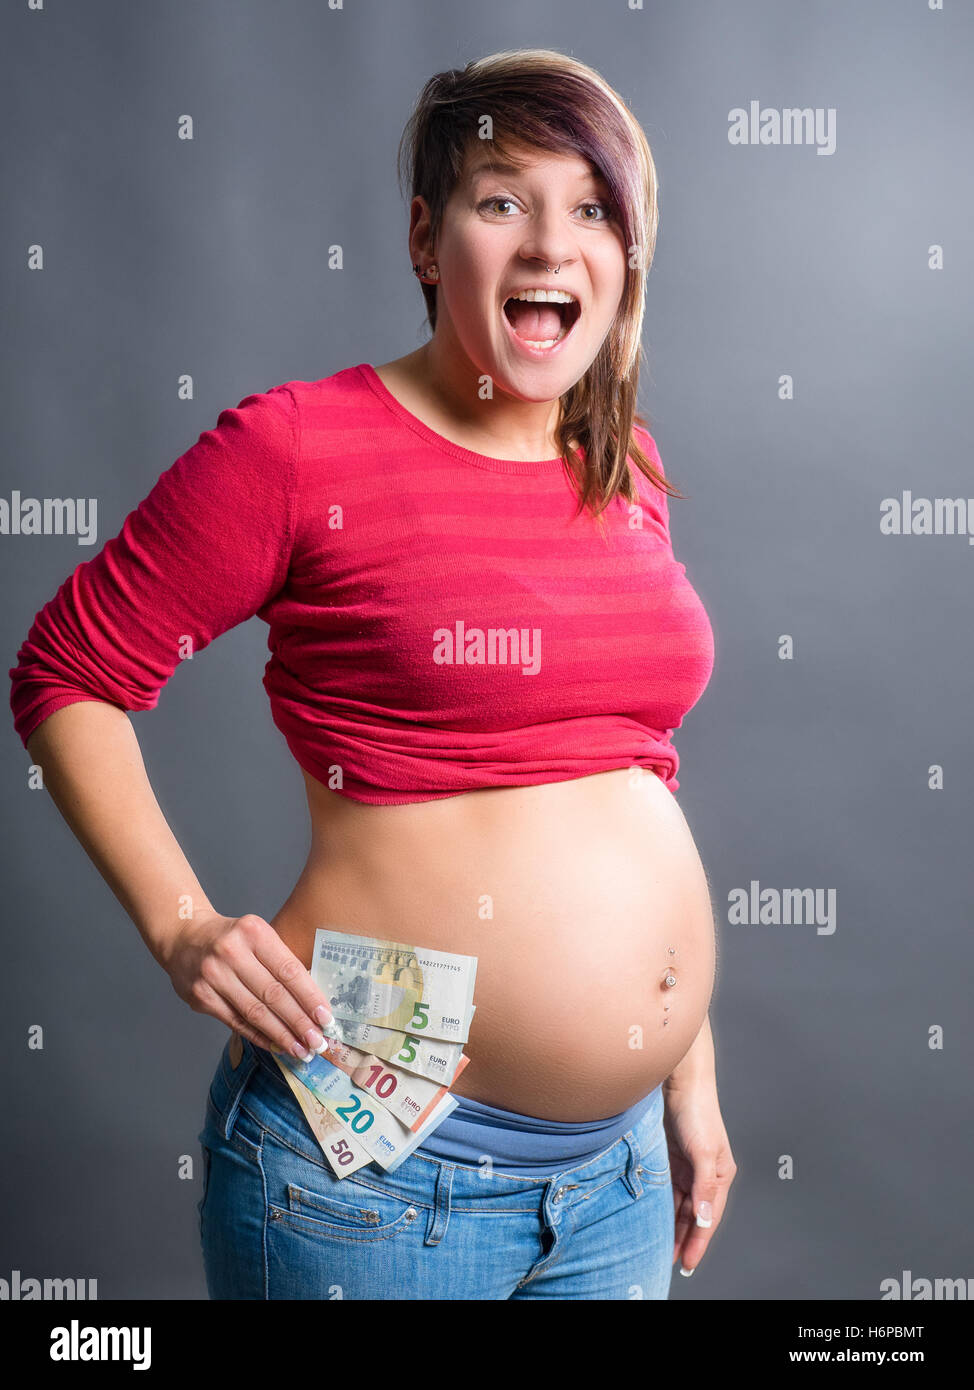 Pregnant woman is very happy without money problems Stock Photo